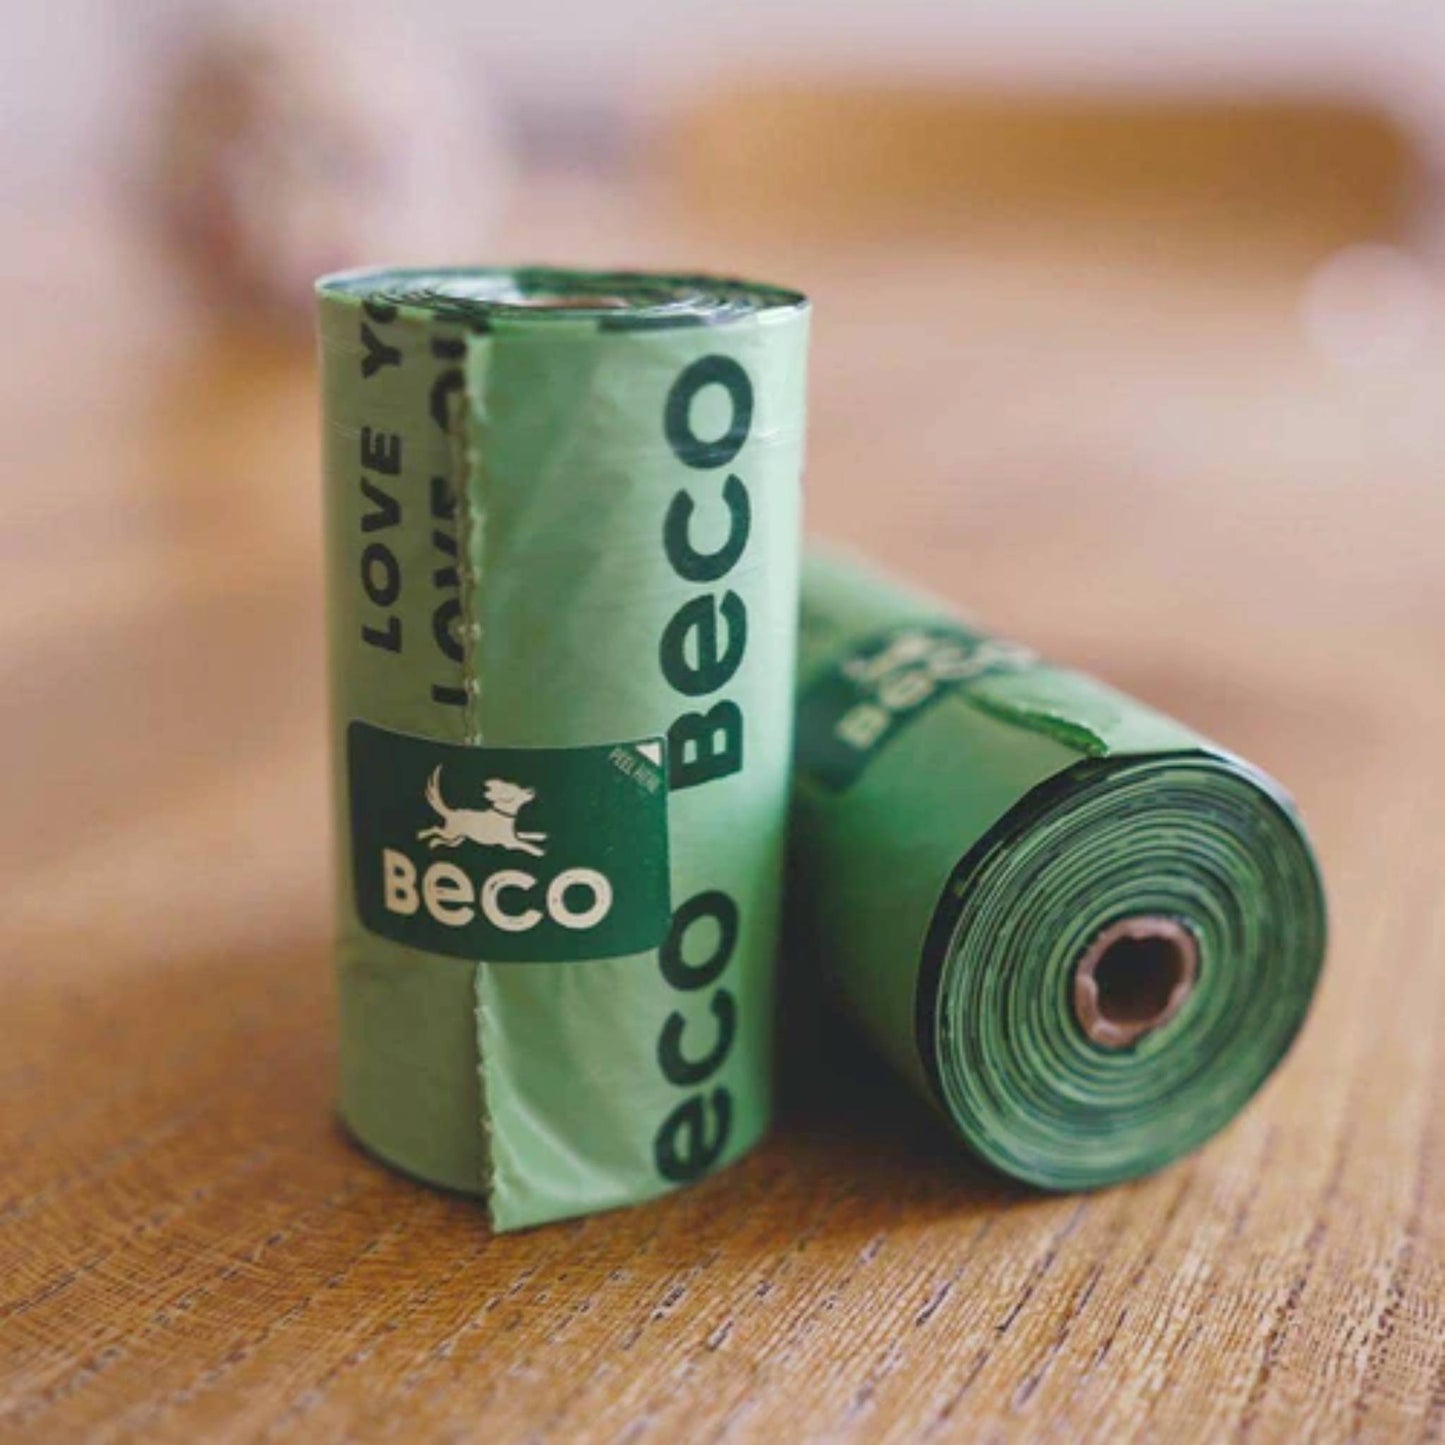 Beco Poo Bags for dogs